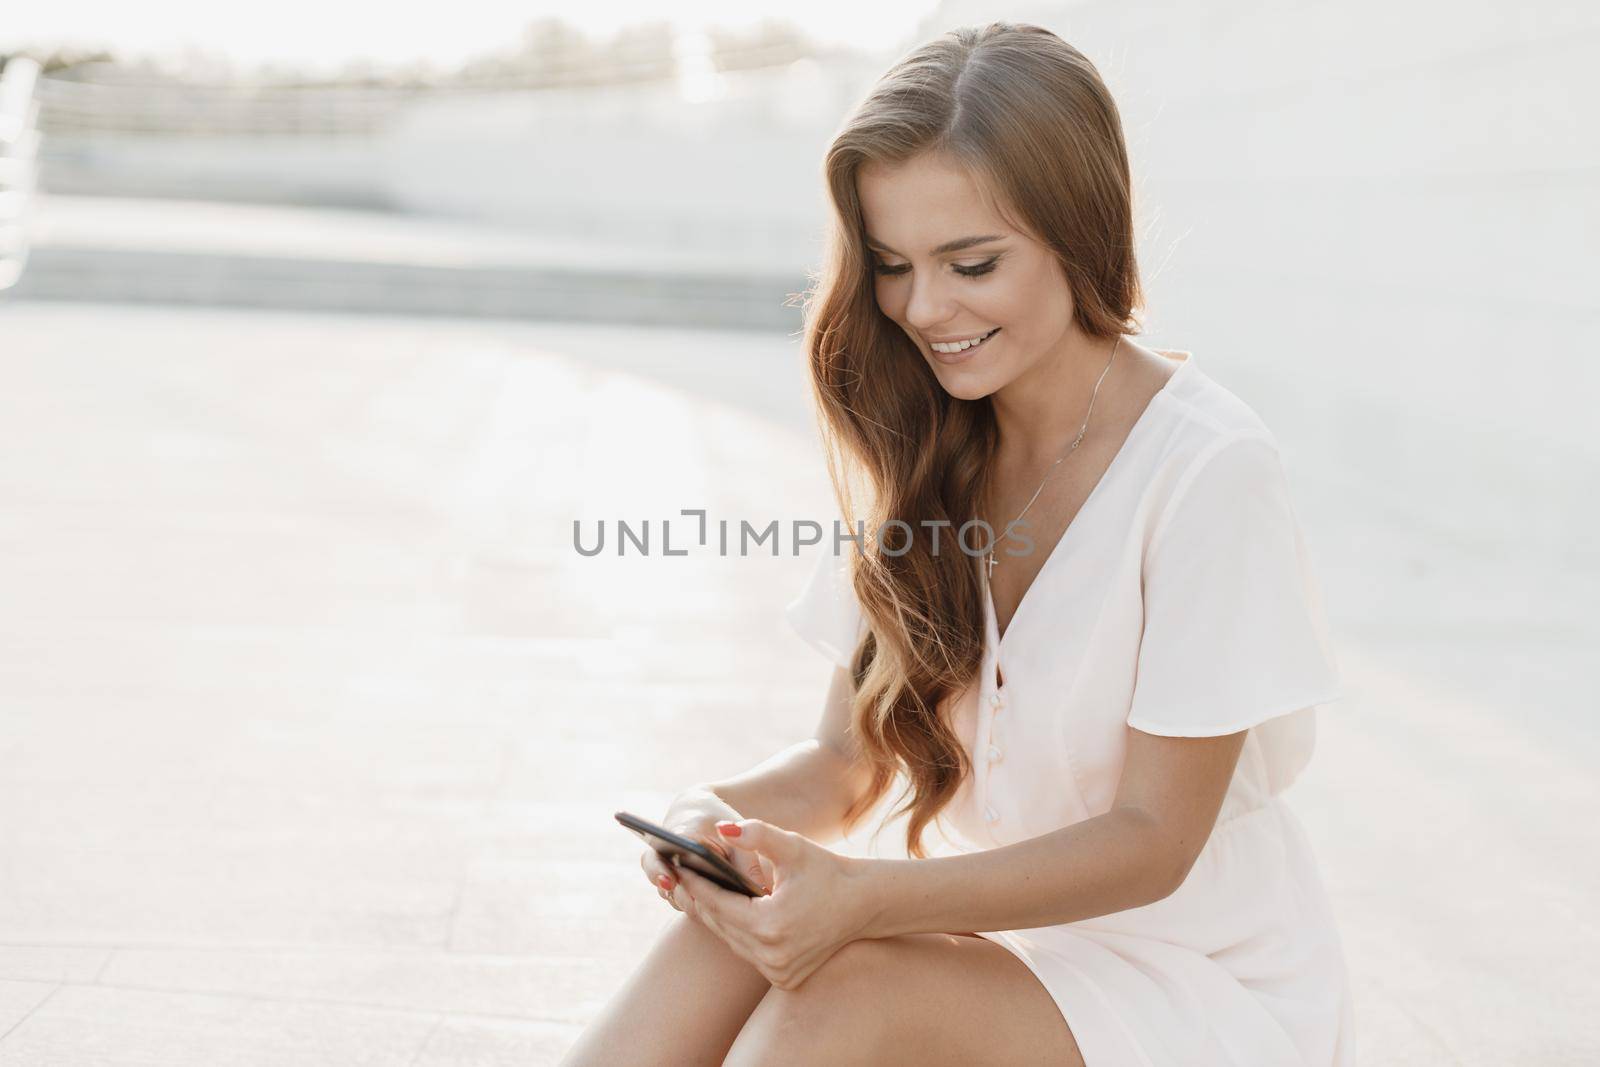 Happy woman with phone. High quality photo